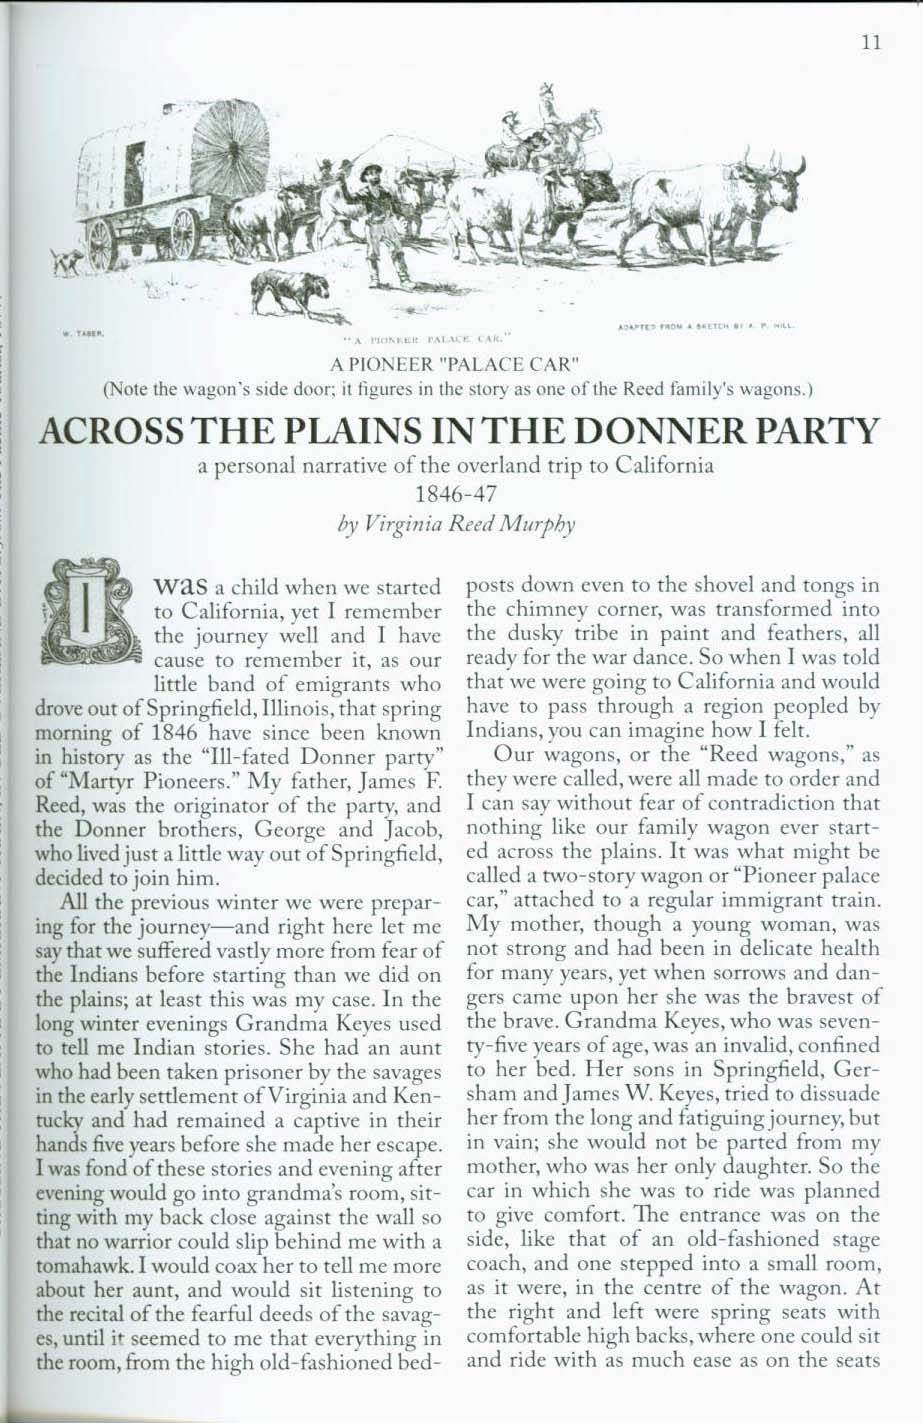 ACROSS THE PLAINS IN THE DONNER PARTY: a personal narrative of the overland trip to California, 1846-47. VIST009f